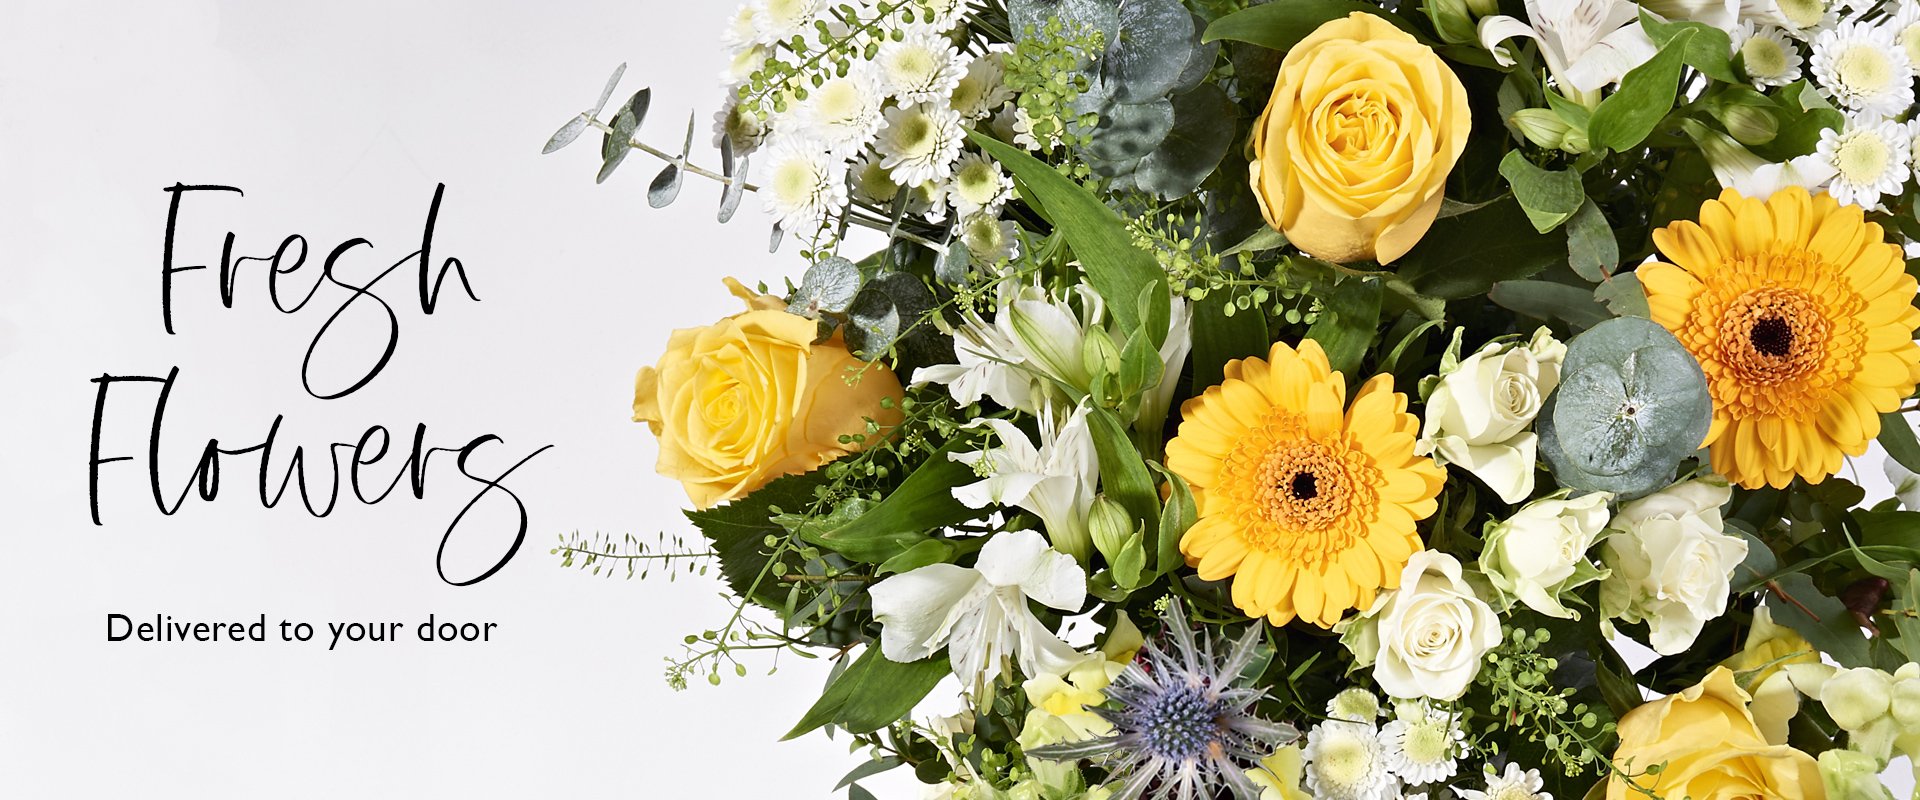 Send fresh letterbox & hand-tied flowers with Postabloom